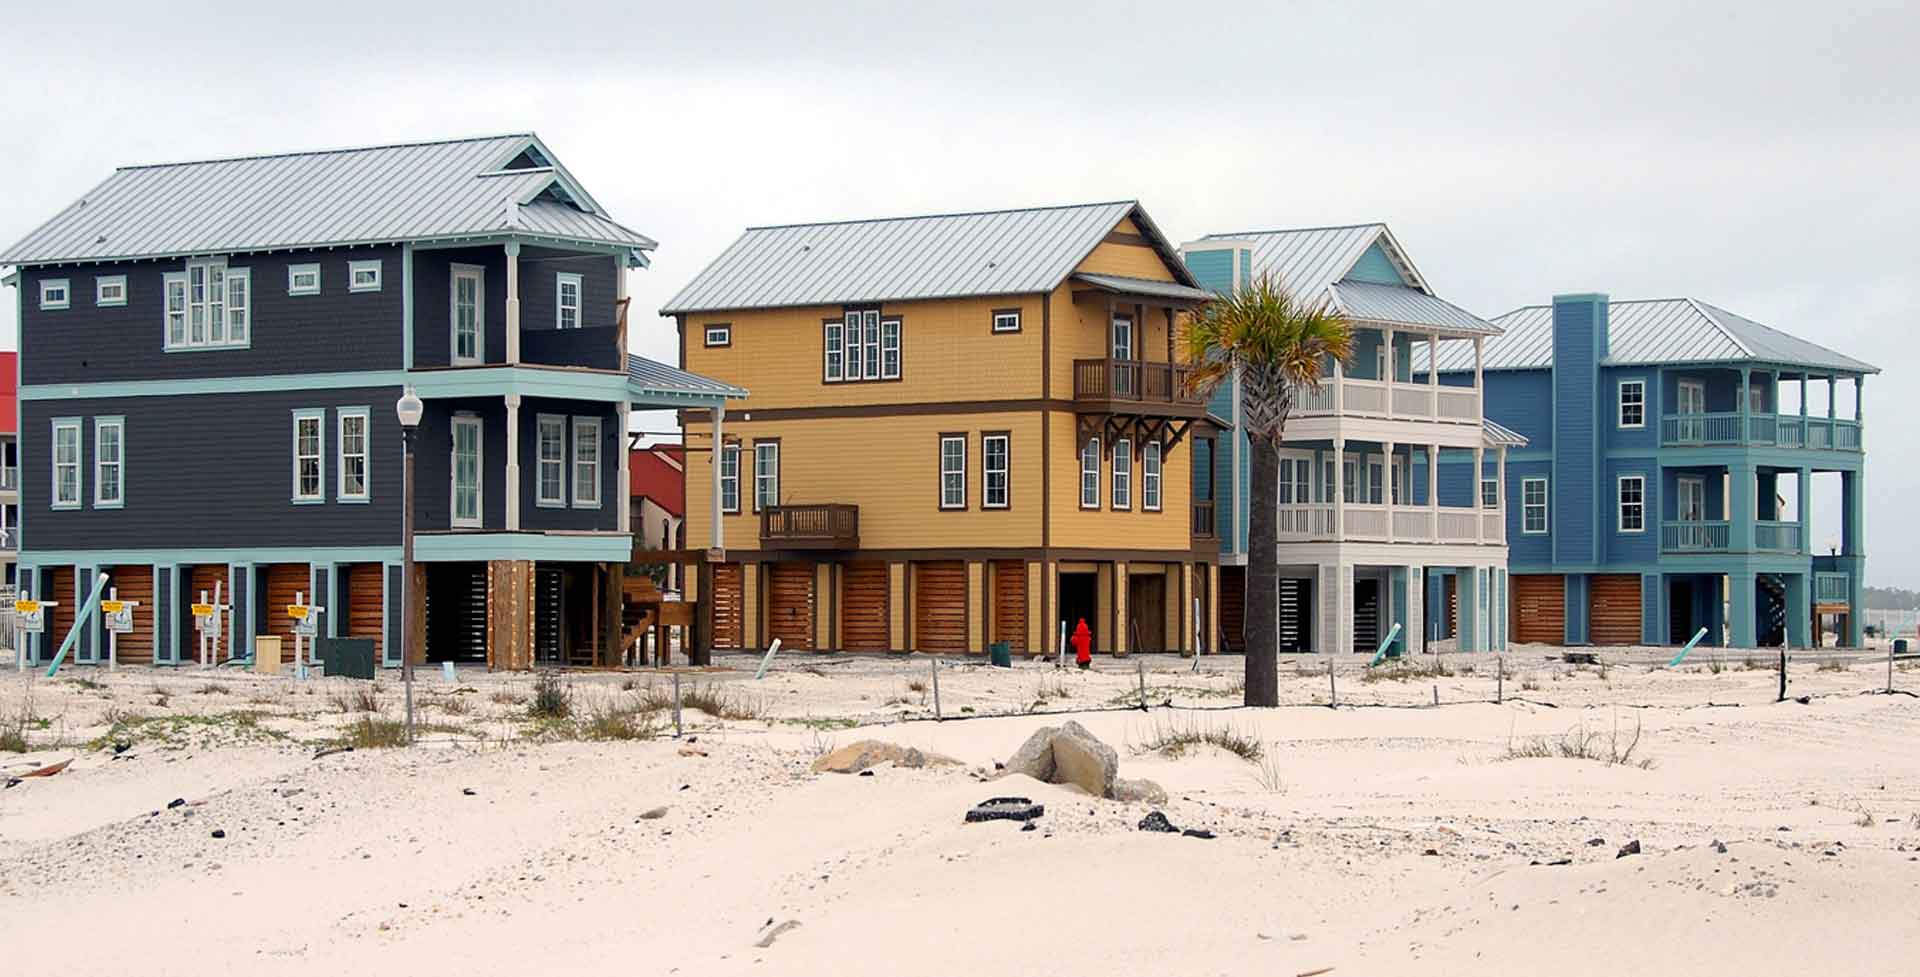 Multiple beach houses all with metal roofs